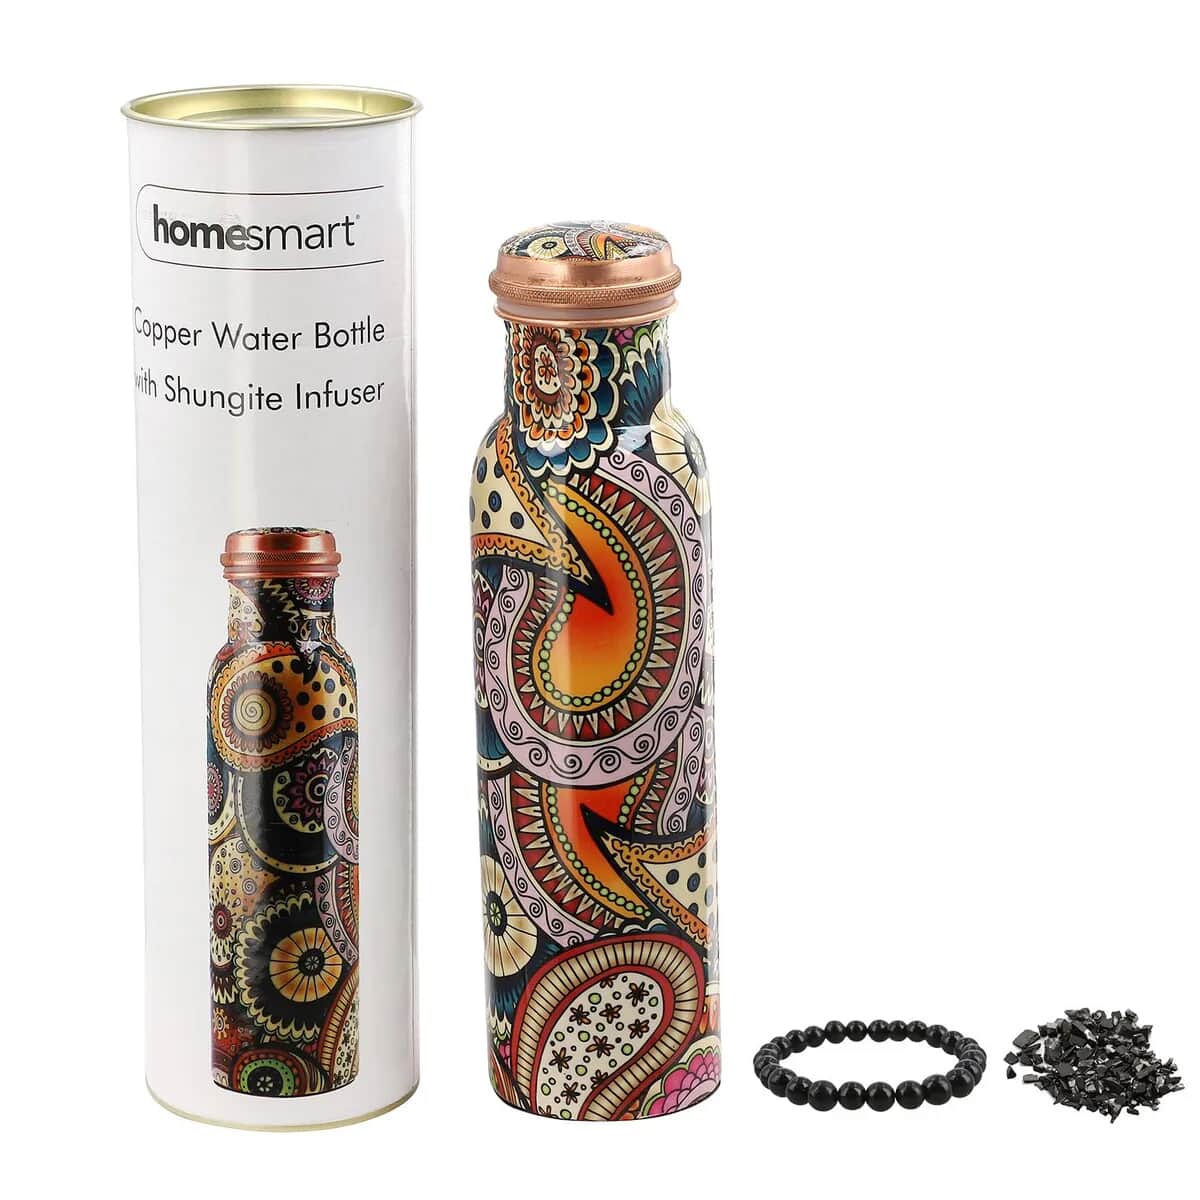 Multi Color Printed Copper Bottle with Shungite Infuser and Shungite Bracelet  Bottle Size: Height- 10.6 inches, Diameter- 2.75 inches, Bracelet - 6mm Bottle Capacity: Approx. 32 Oz. image number 0